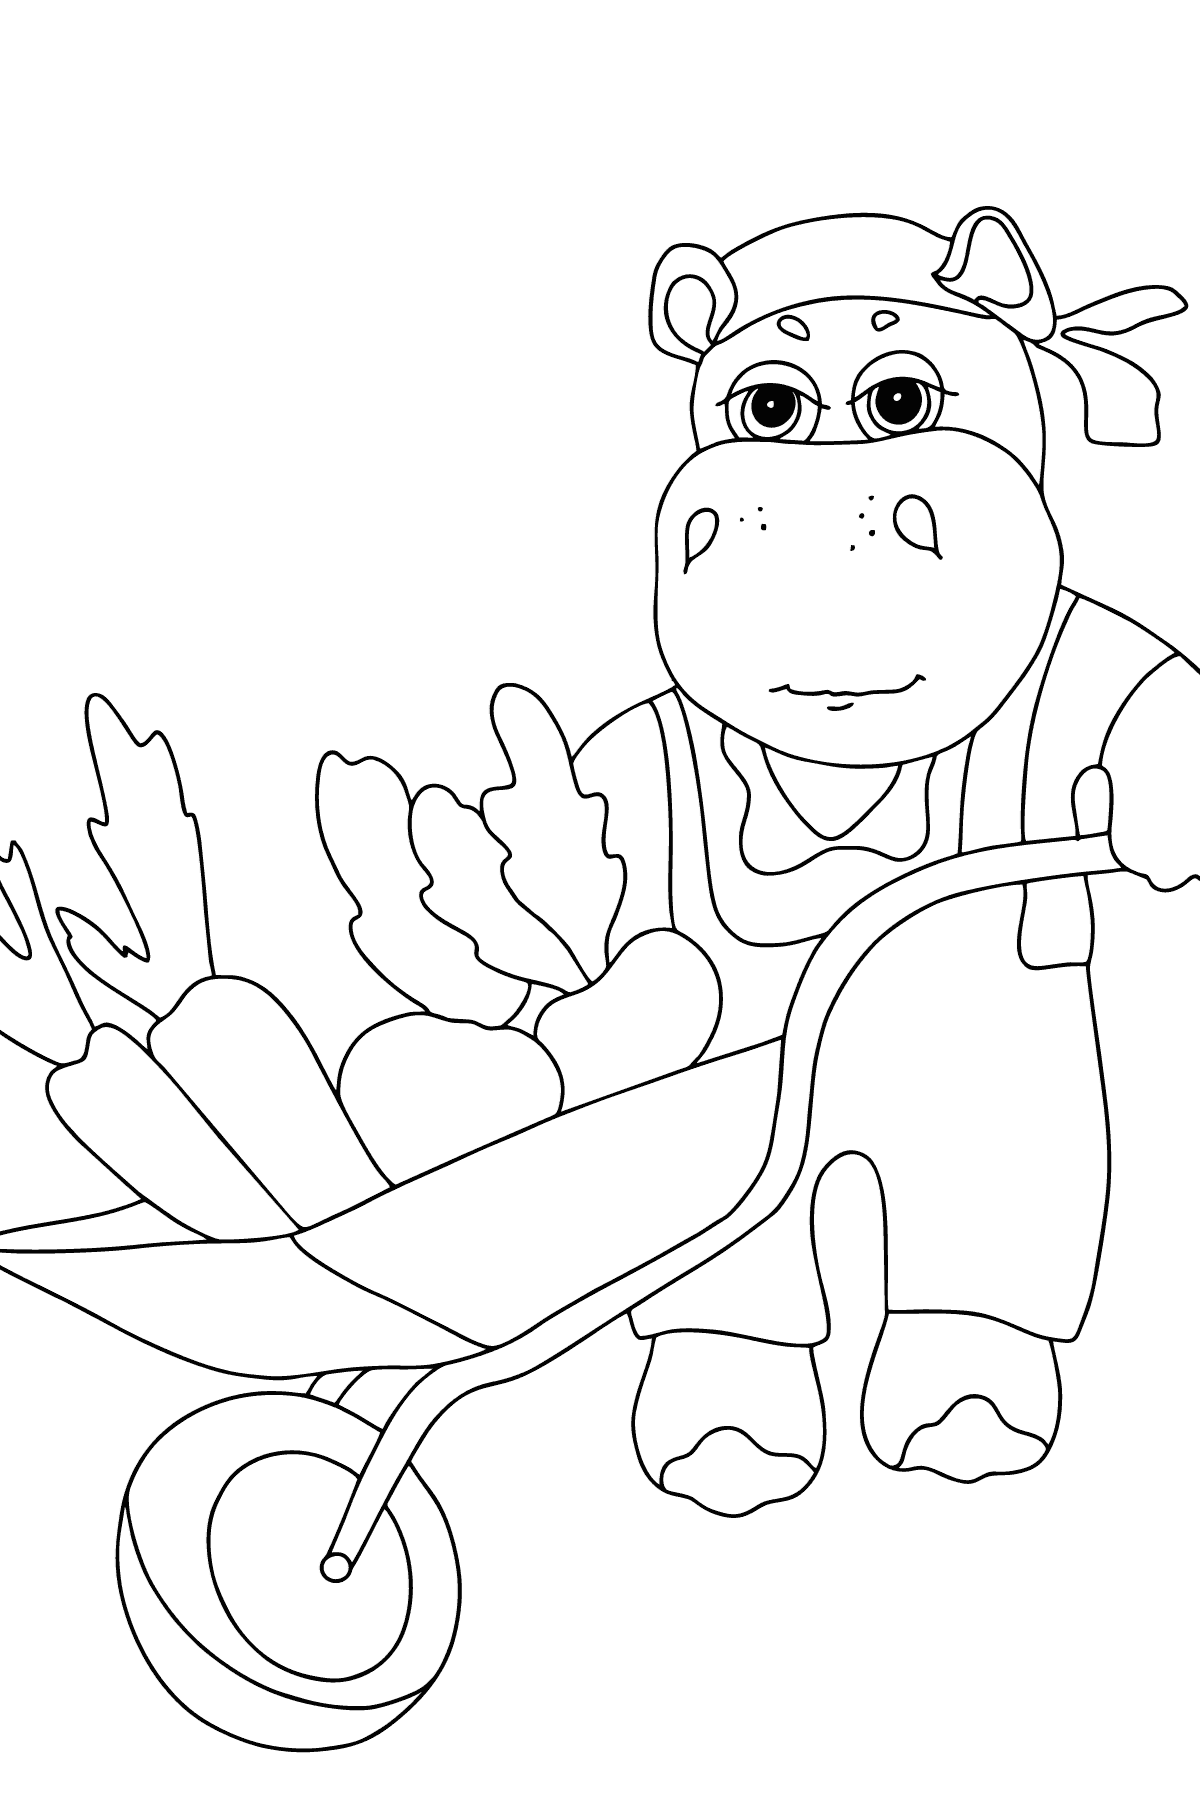 Hippo in the garden coloring page - Coloring Pages for Kids